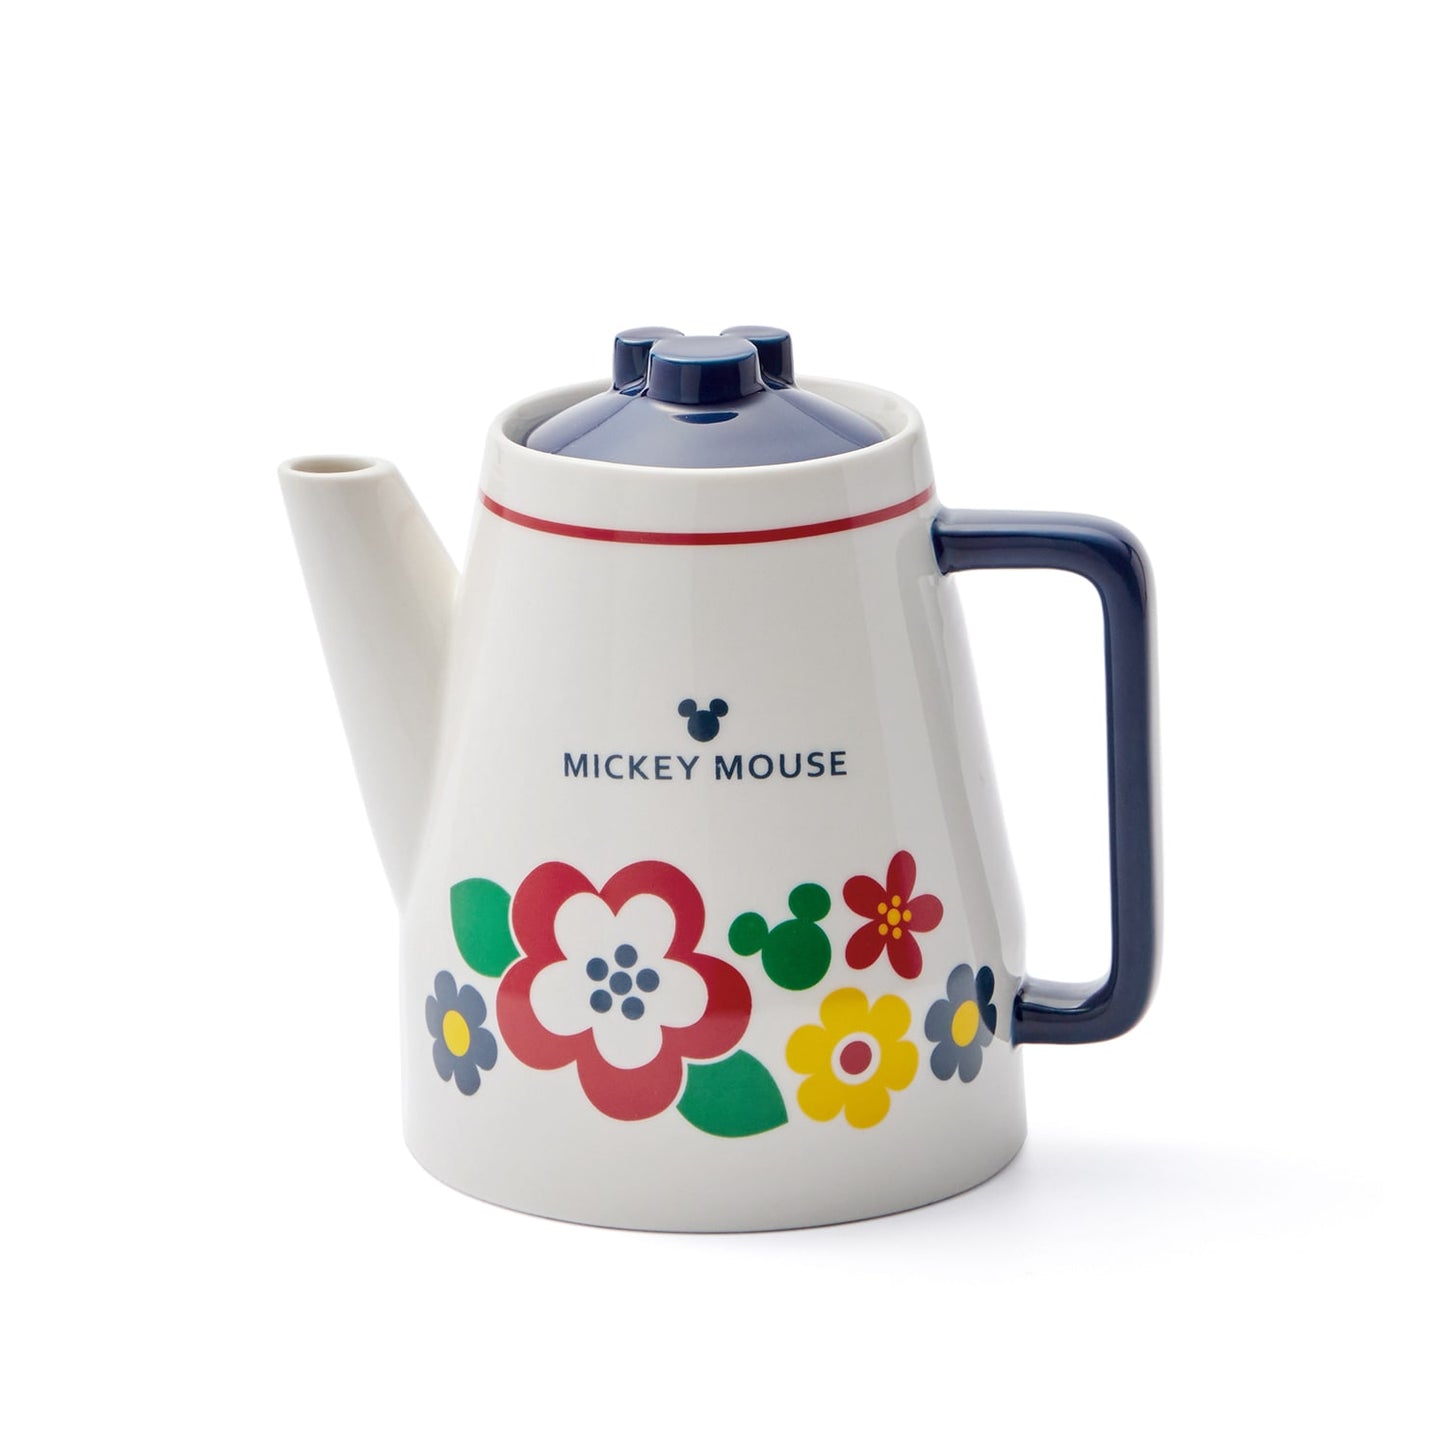 Mickey mouse coffee teapot